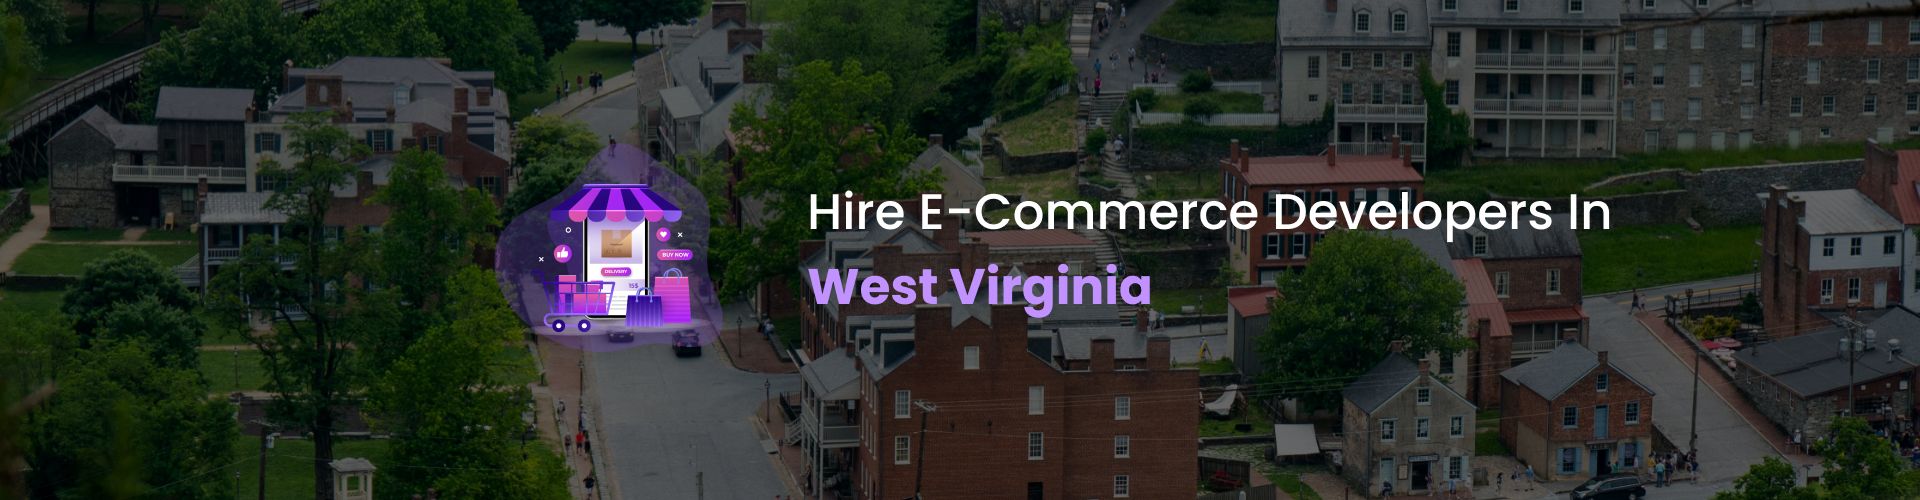 hire ecommerce developers in west virginia